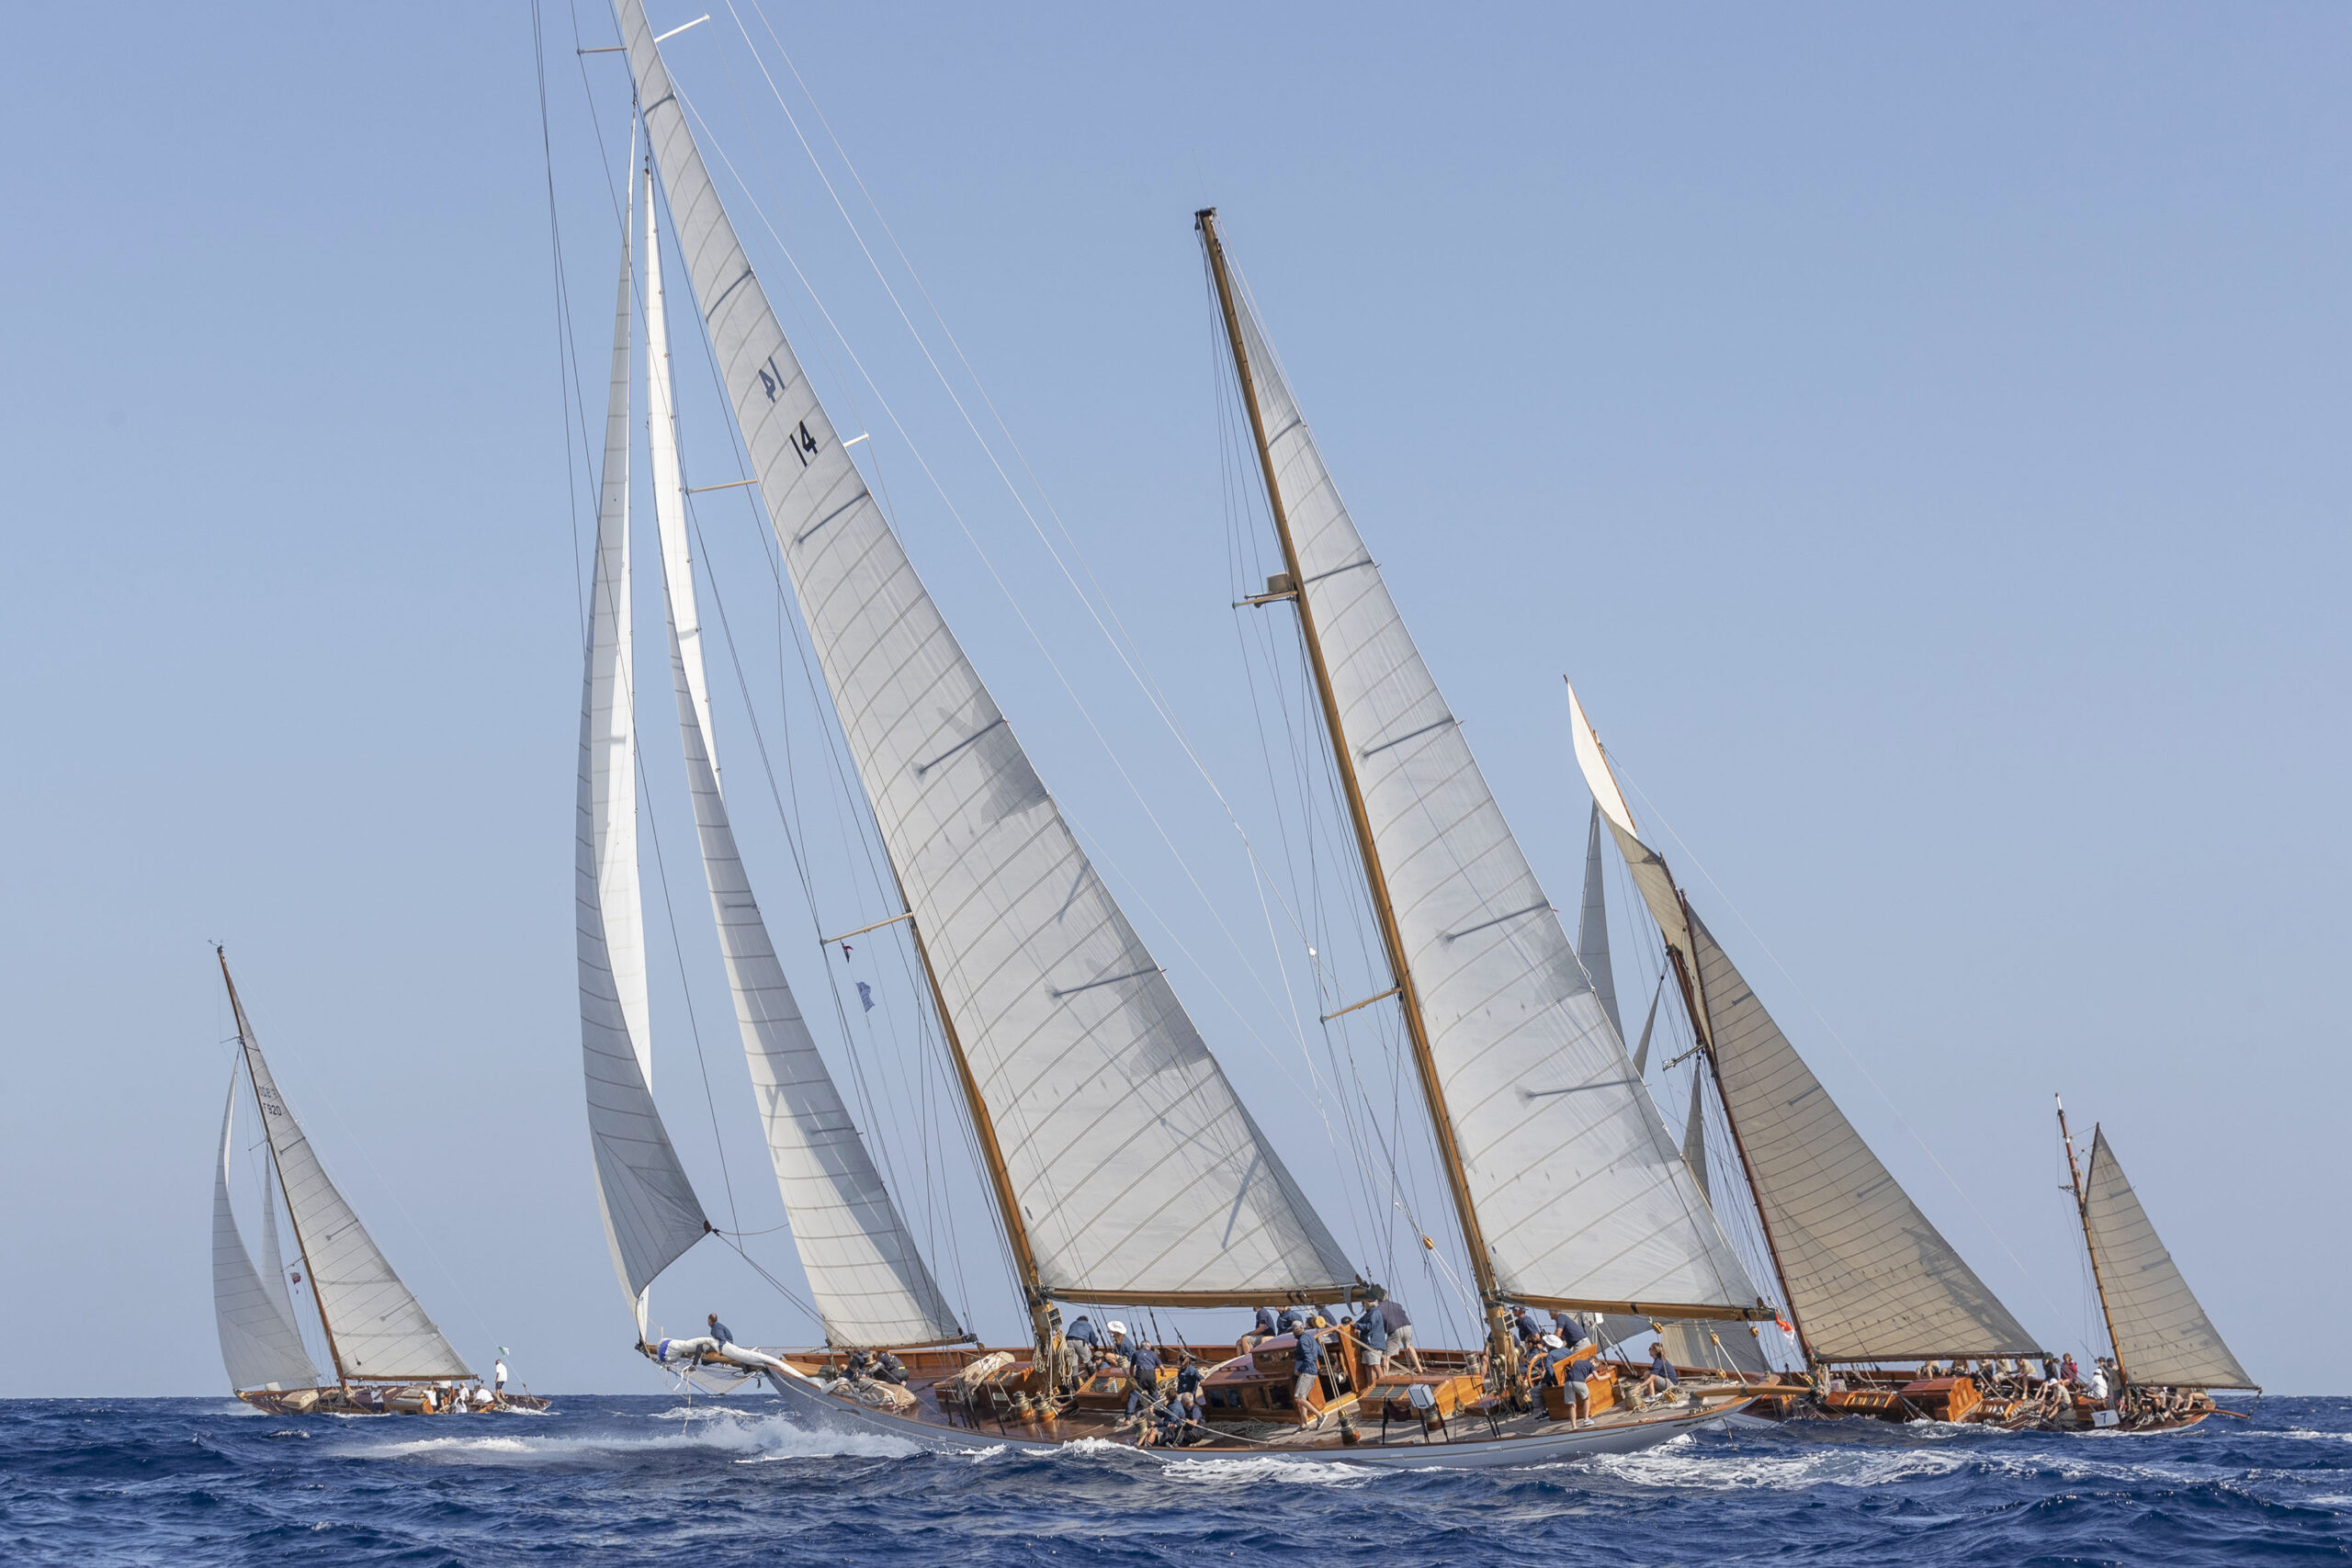 Les Voiles – an extension of summer!